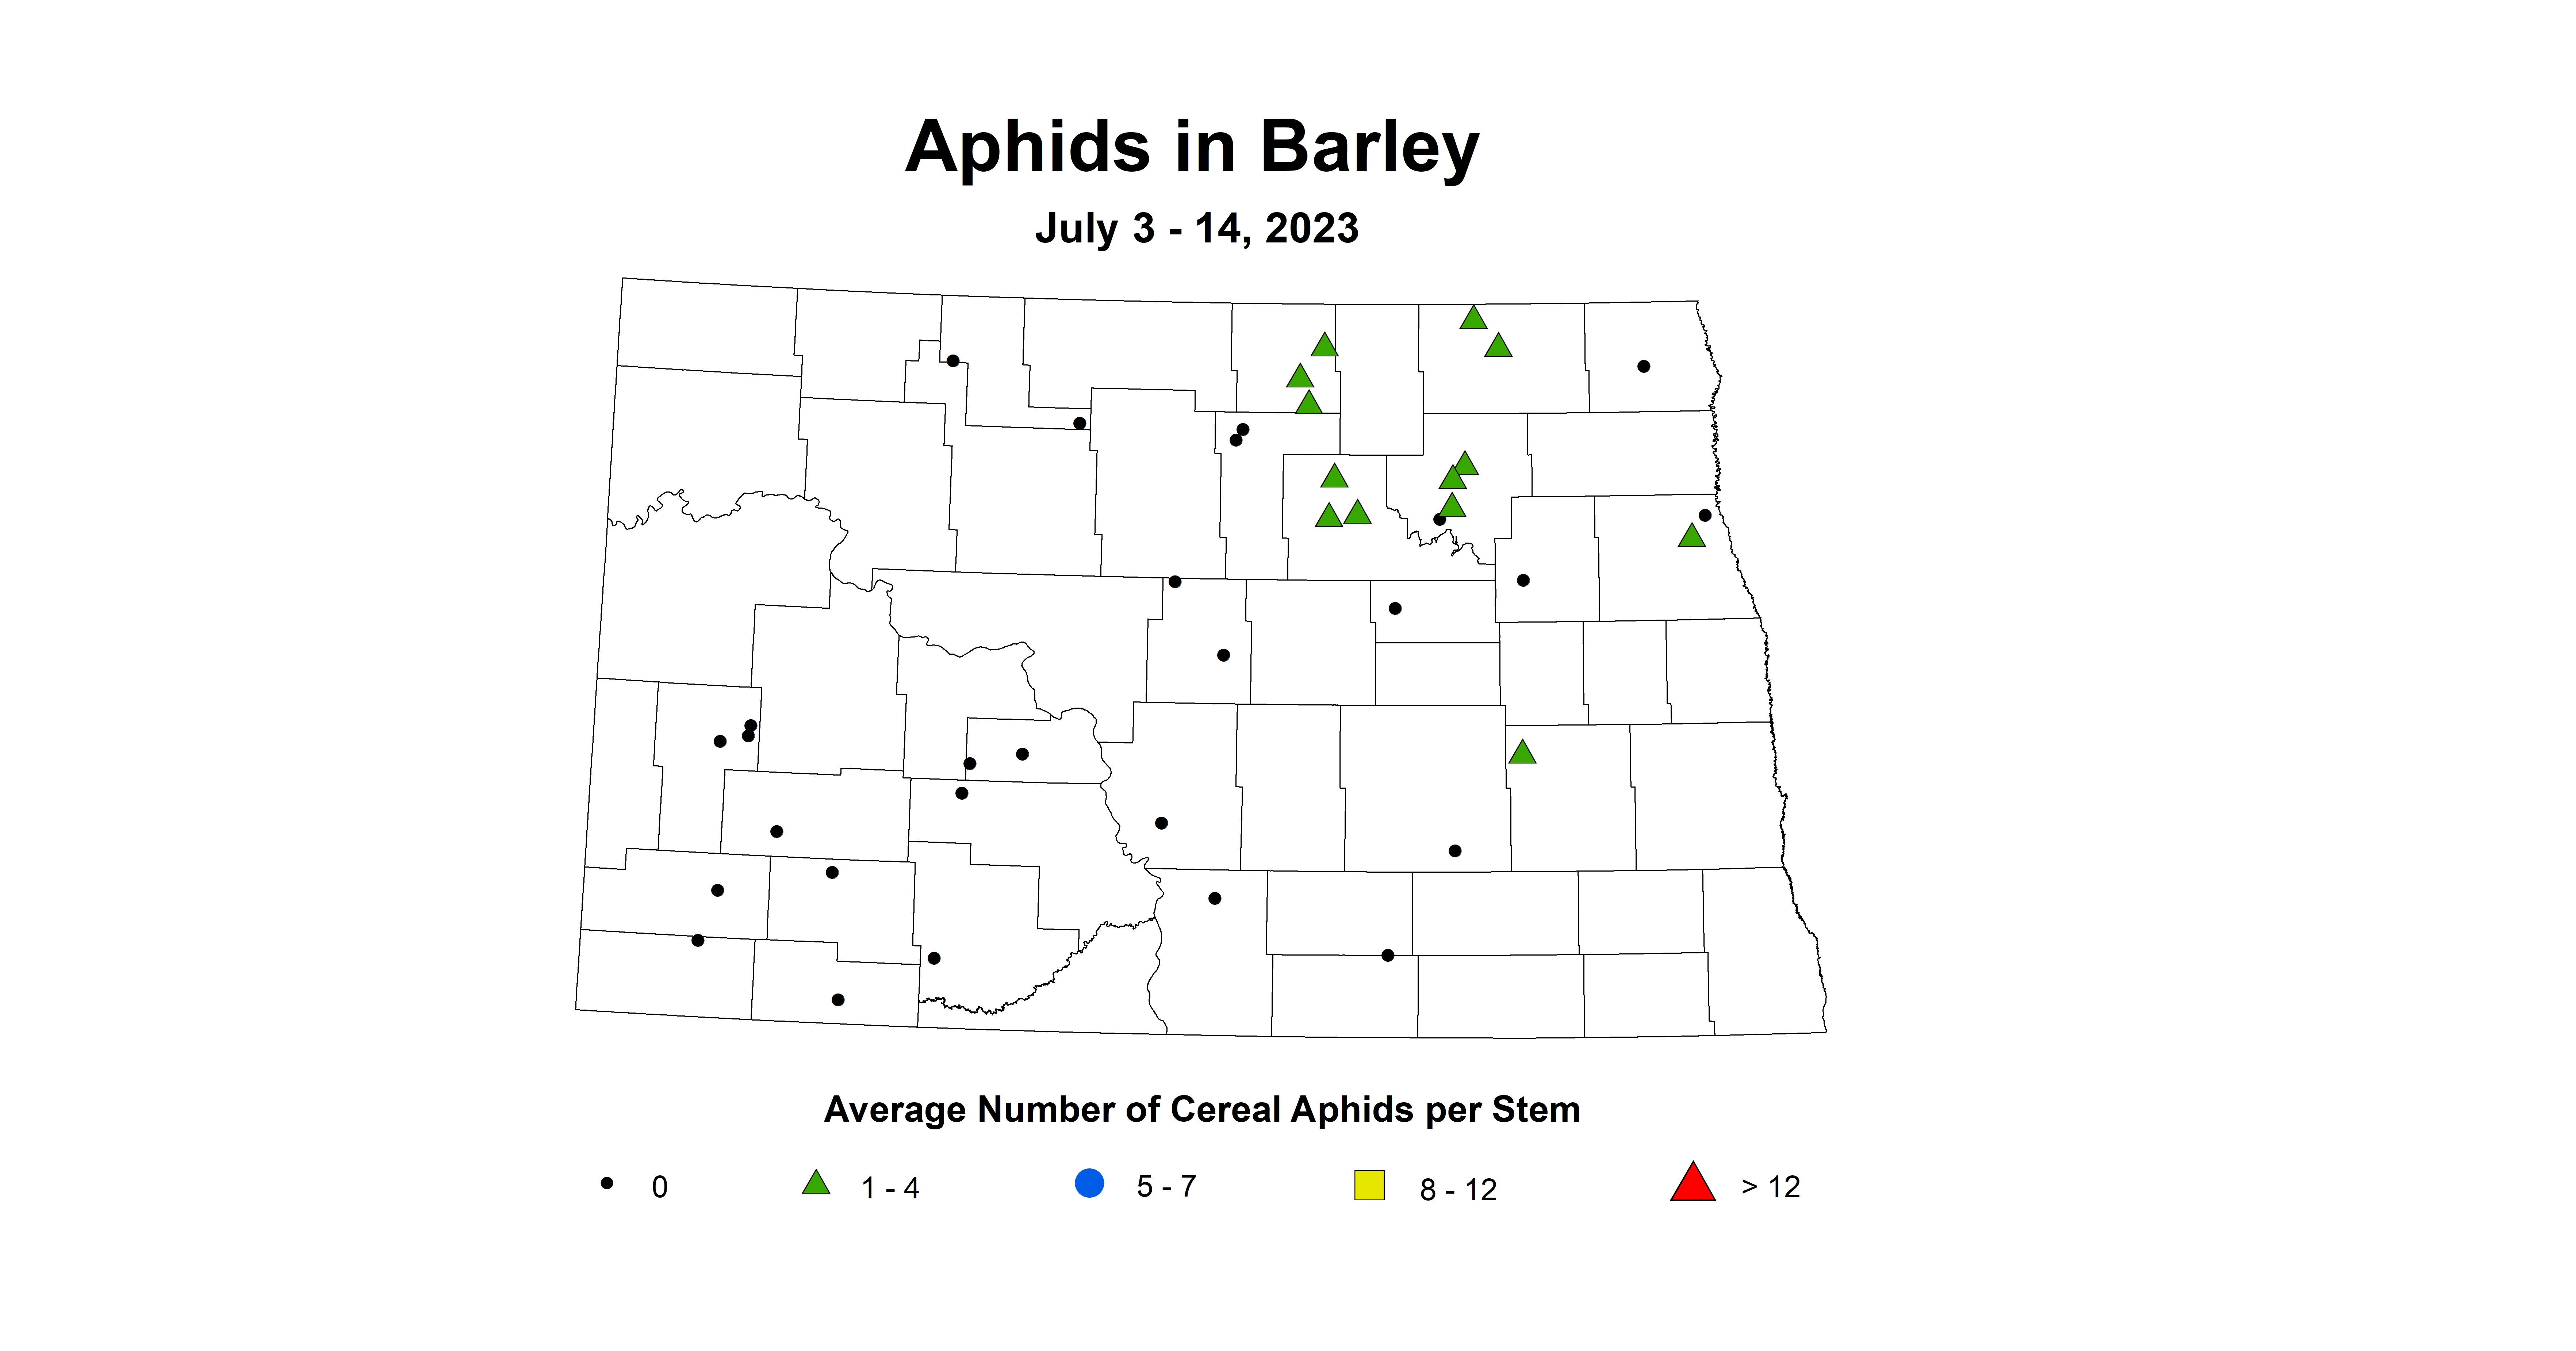 barley aphids July 3-14 2023